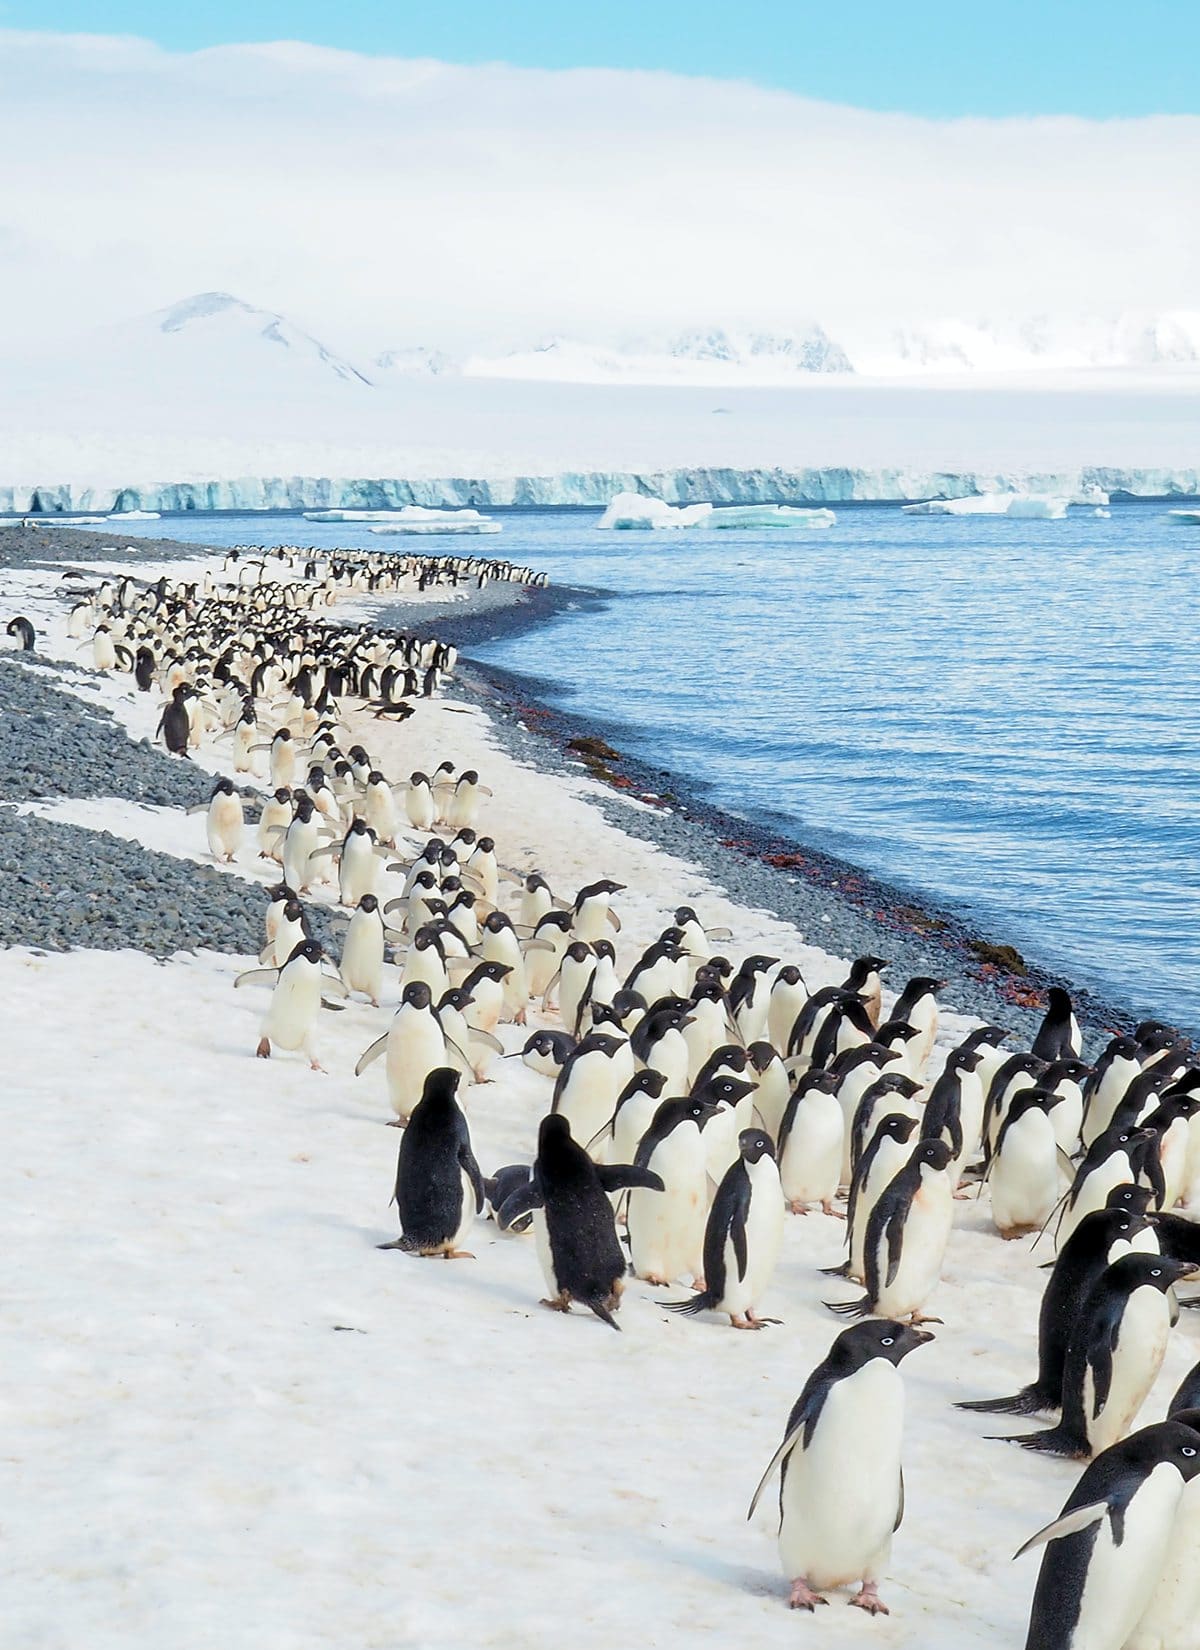 Penguins in Antarctica, with the blue water on the right.